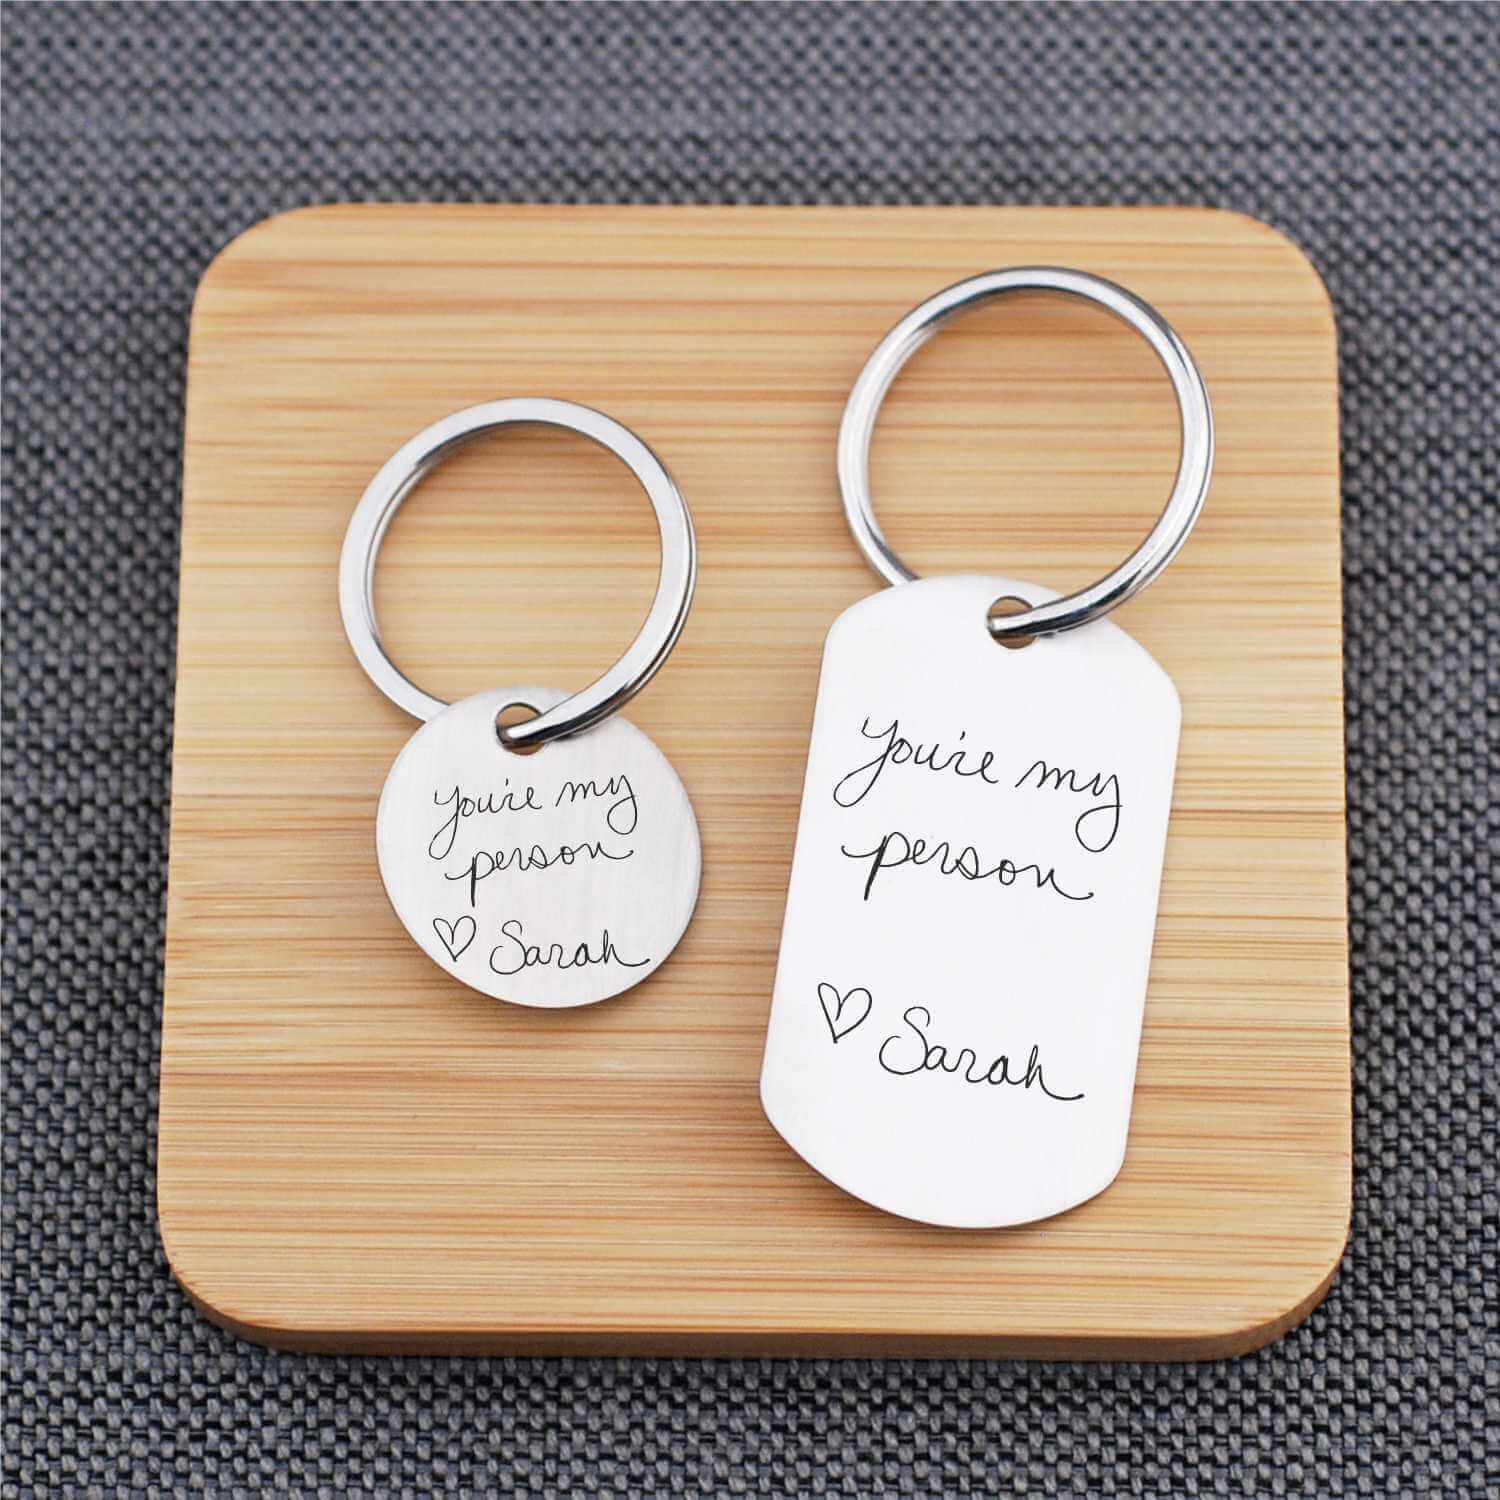 Round Keychain and Dog Tag Keychain with You are my person in actual handwriting